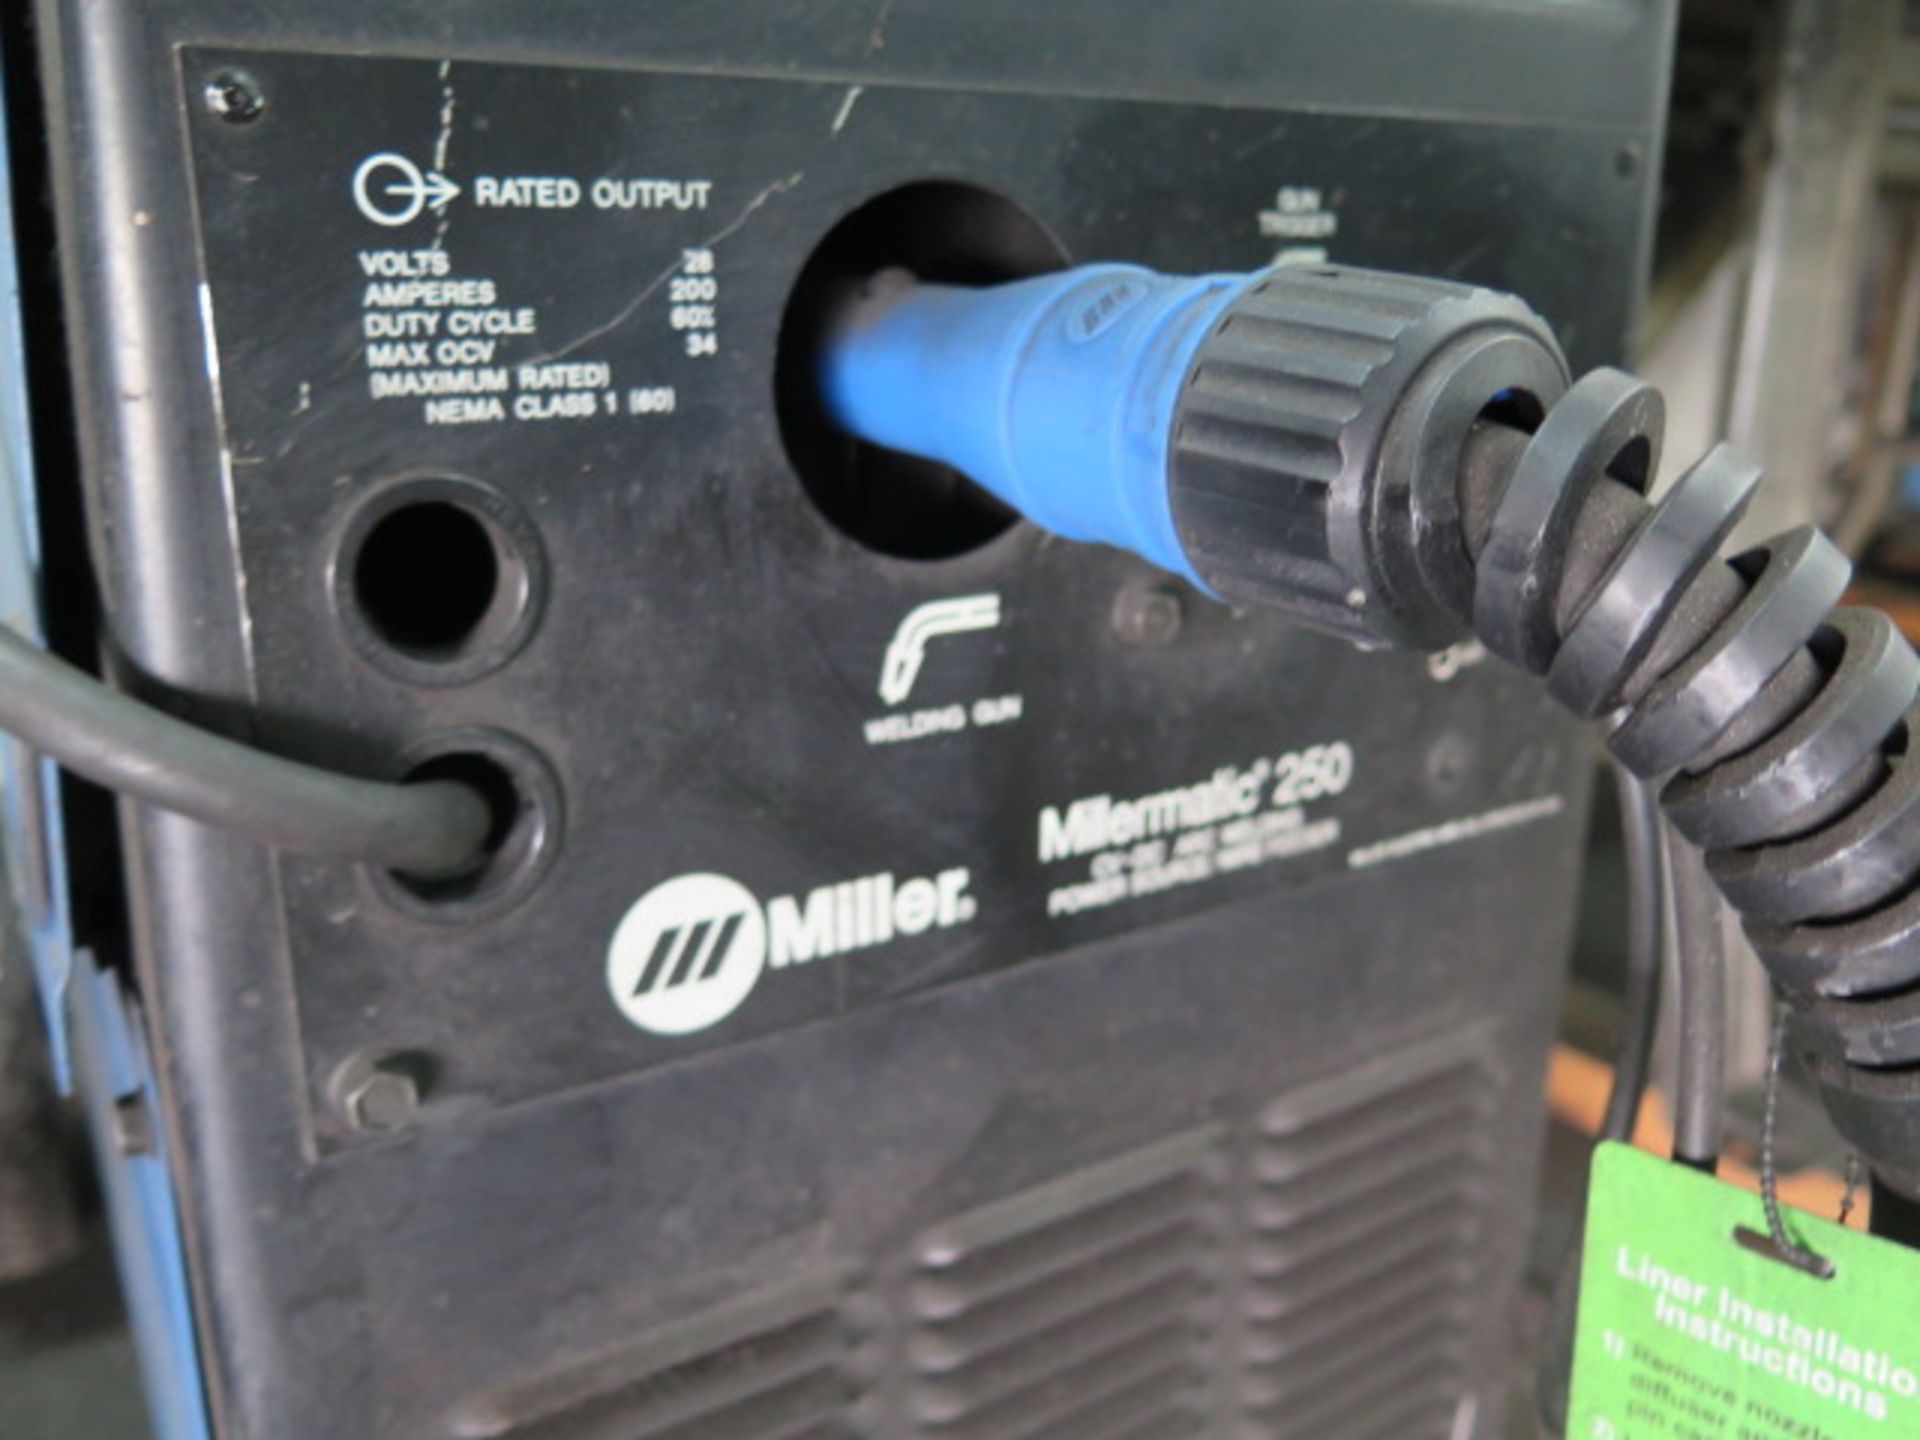 Miler Millermatic 250 CV-DC Arc Welding Power Source and Wire Feeder (SOLD AS-IS - NO WARRANTY) - Image 7 of 10